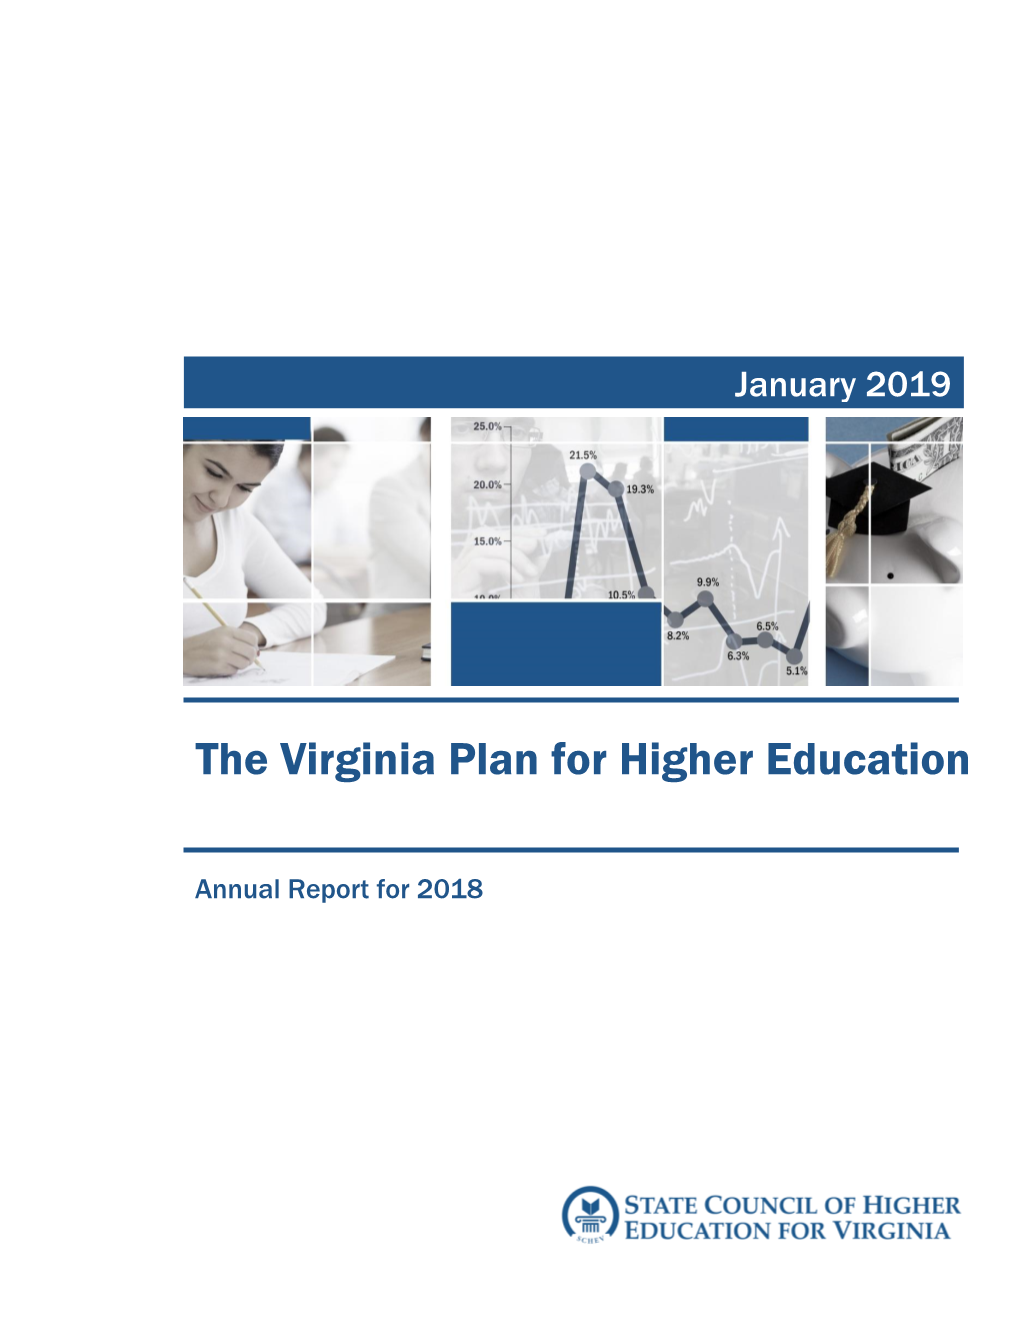 The Virginia Plan for Higher Education Annual Report for 2018